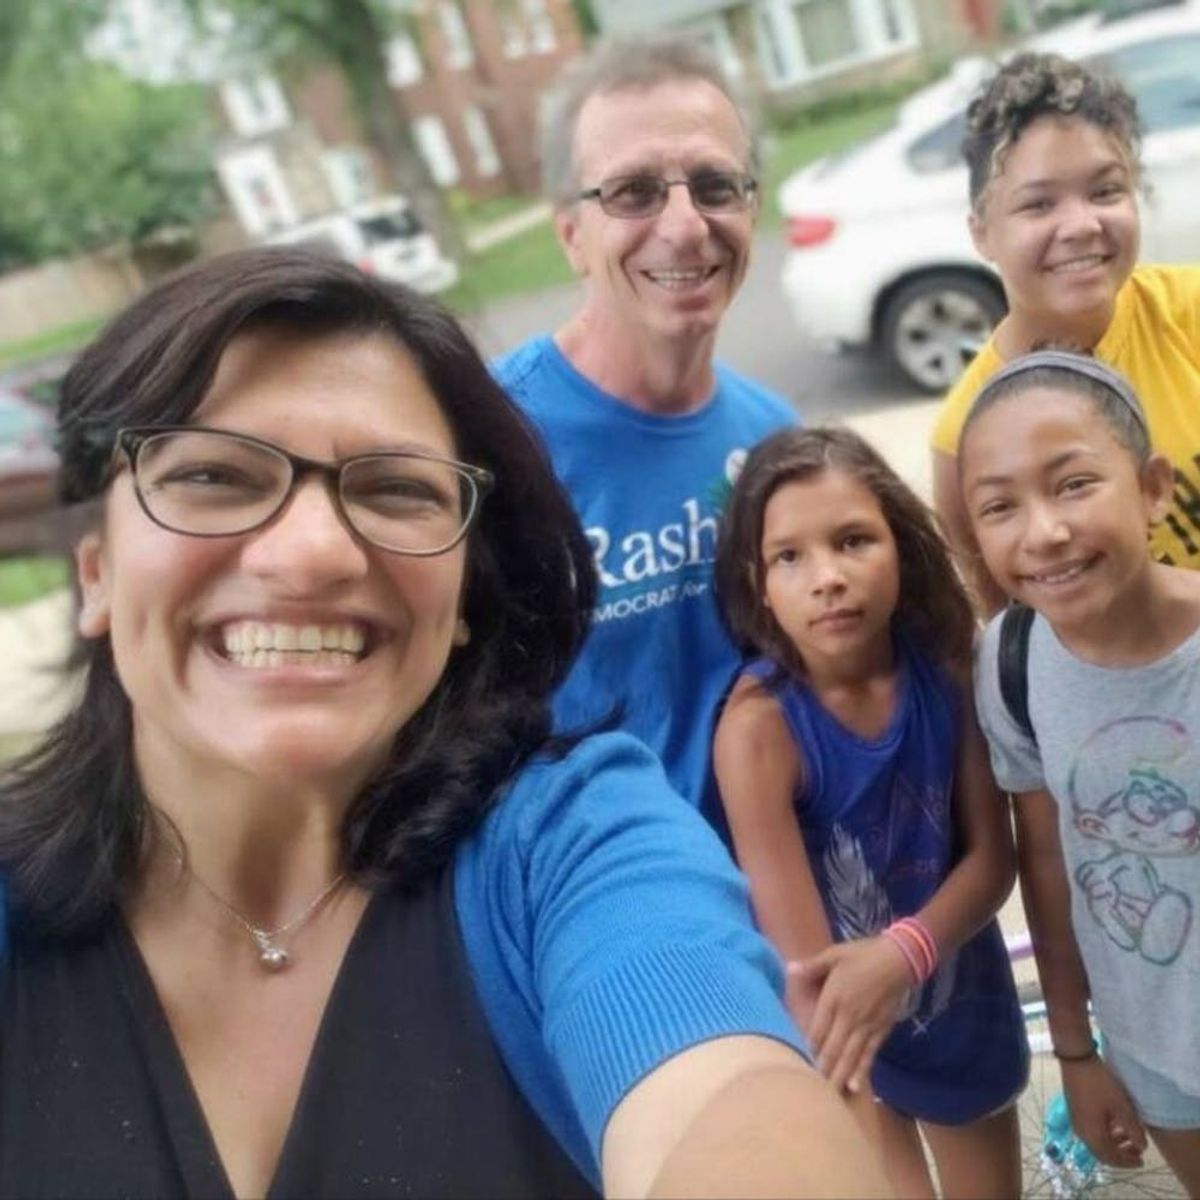 Rashida Tlaib of Michigan Just Set Course to Become the First Muslim Woman in Congress